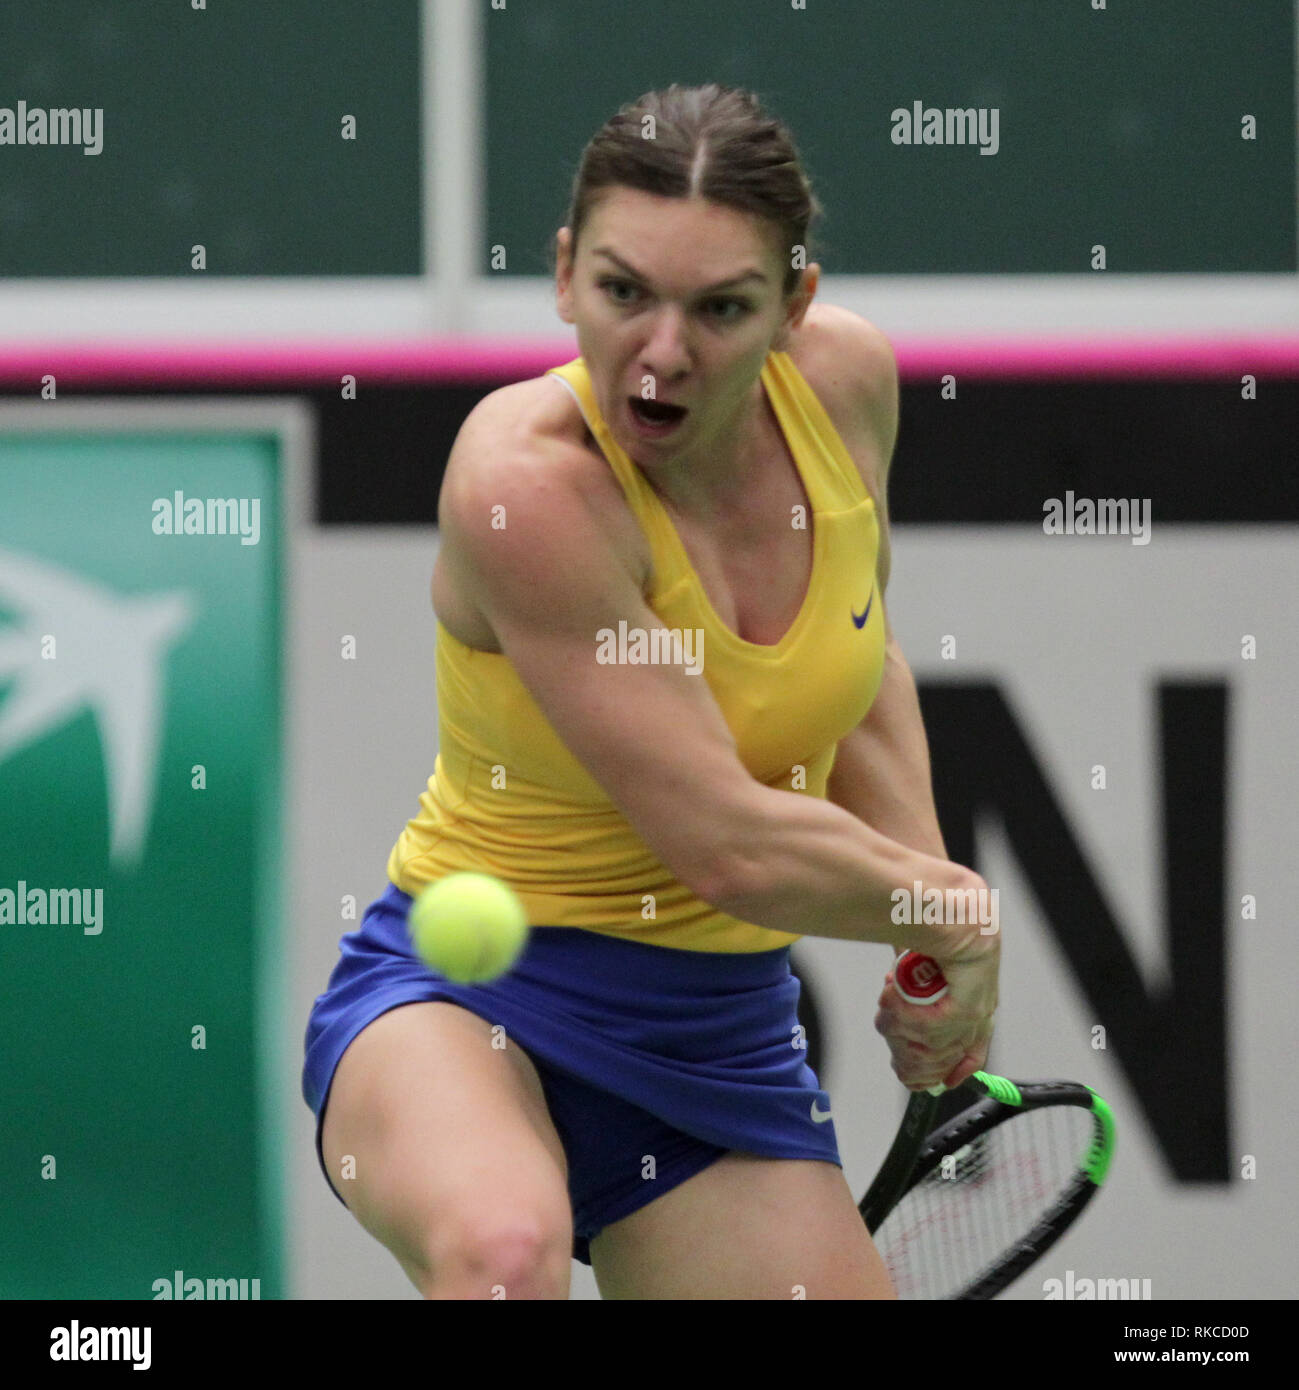 Ostrava, Czech Republic. 10th Feb, 2019. Romanian tennis player Simona Halep  in action during the match against Karolina Pliskova of the Czech Republic  during the Fed Cup World Group, 1st Round, between